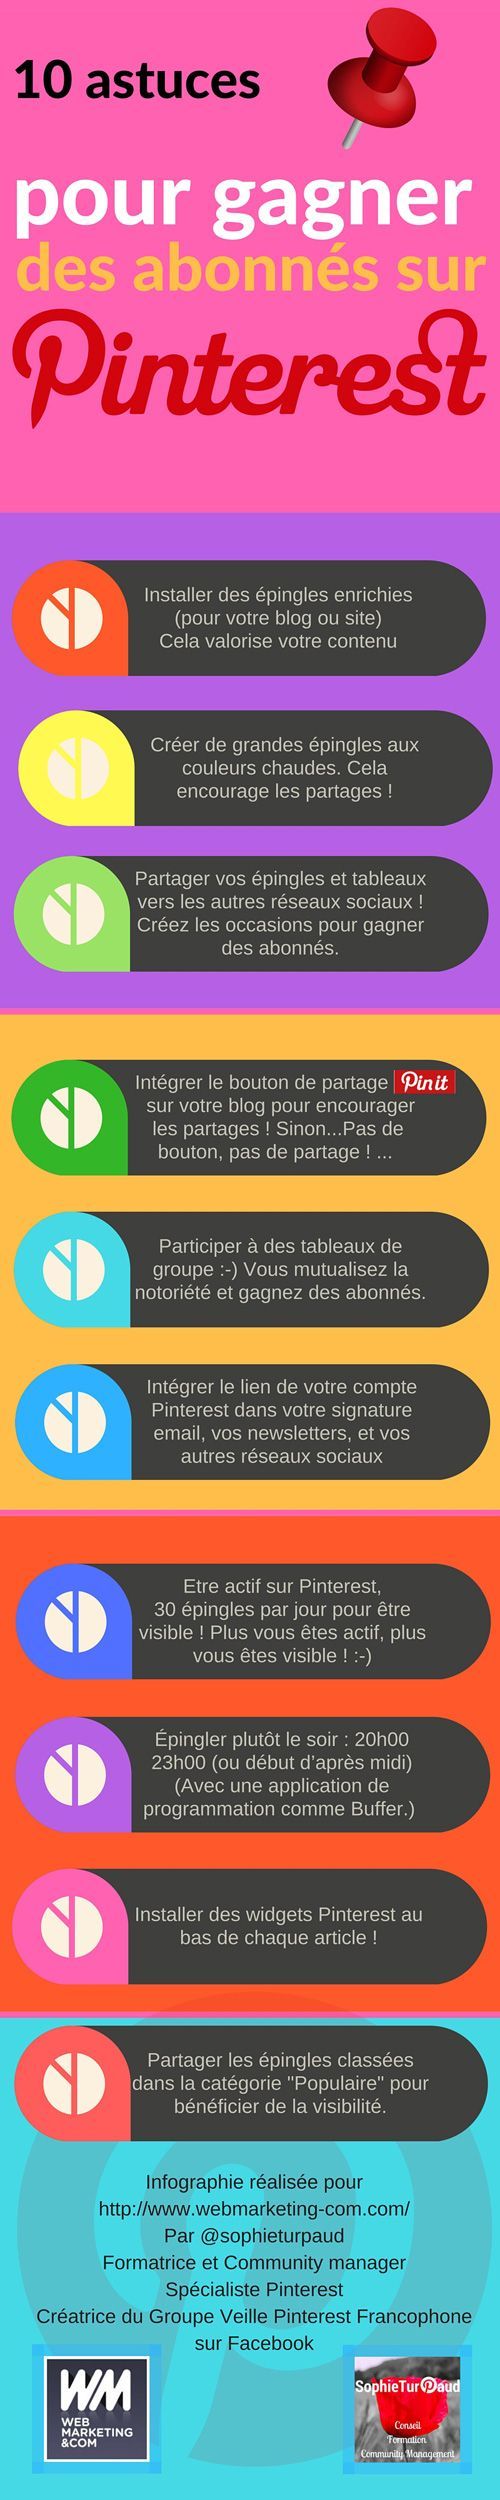 Advertising-Infographics-10-astuces-pour-gagner-des-abonnes-sur Advertising Infographics : 10 astuces pour gagner des abonnés sur Pinterest